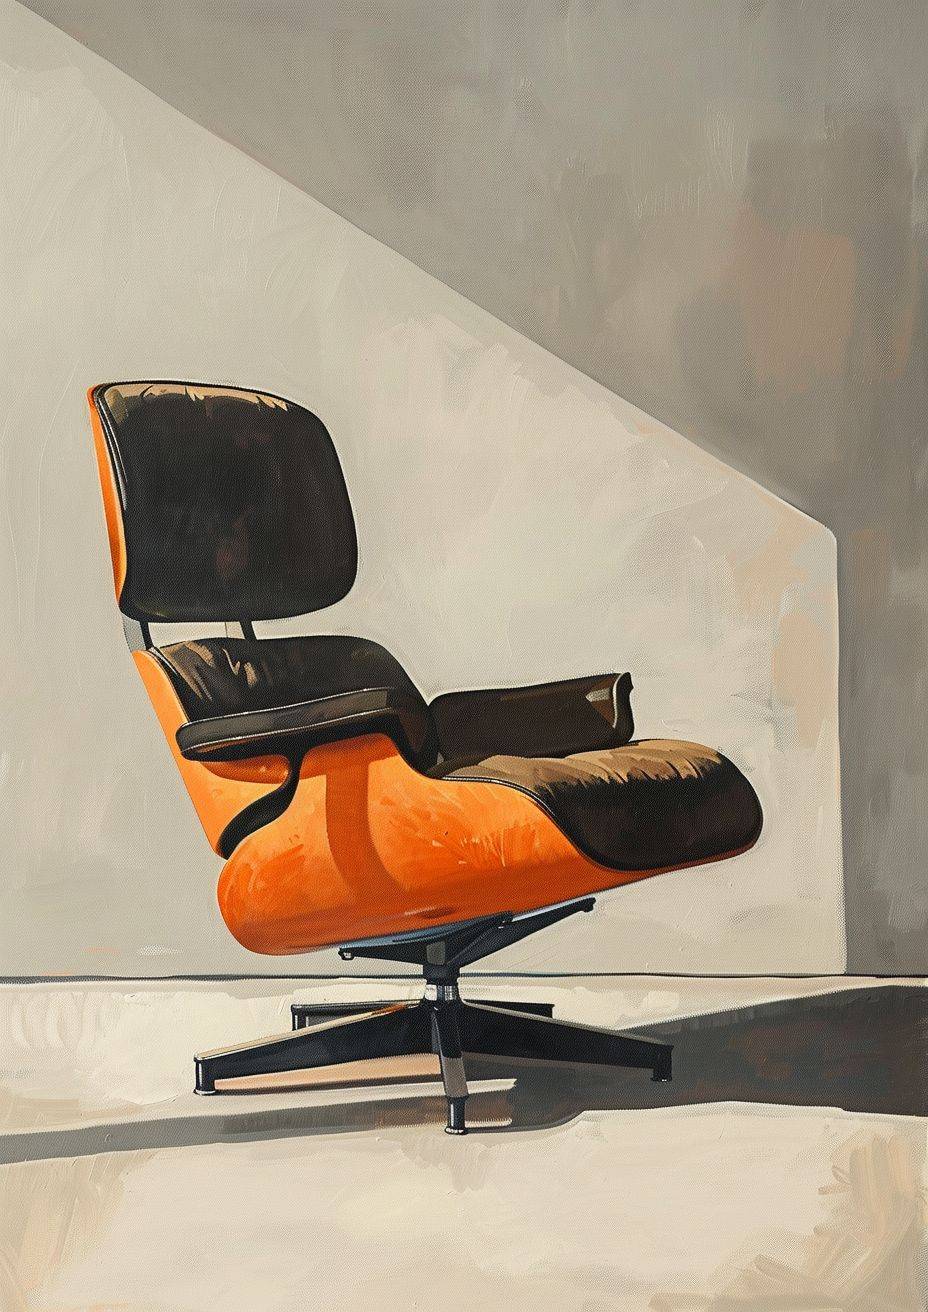 painting, minimalist, famous iconic designer chair poster